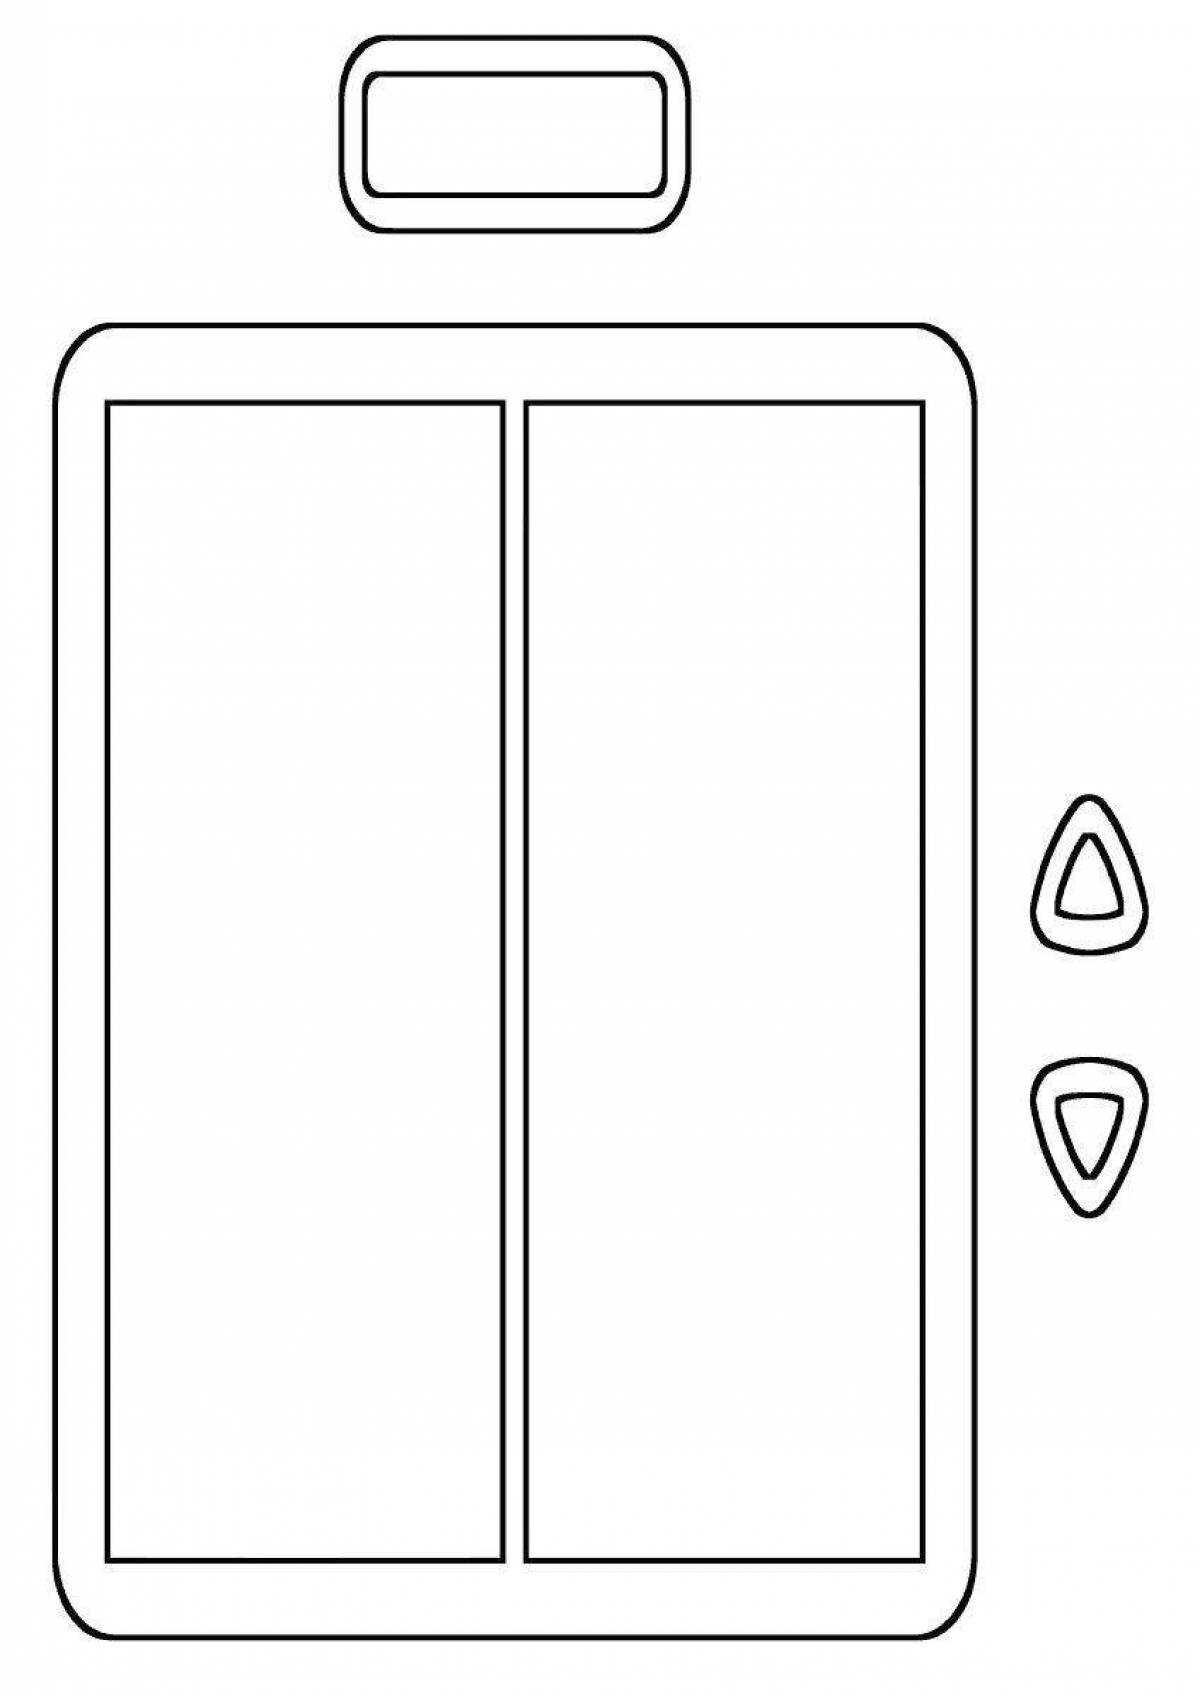 Adorable elevator coloring page